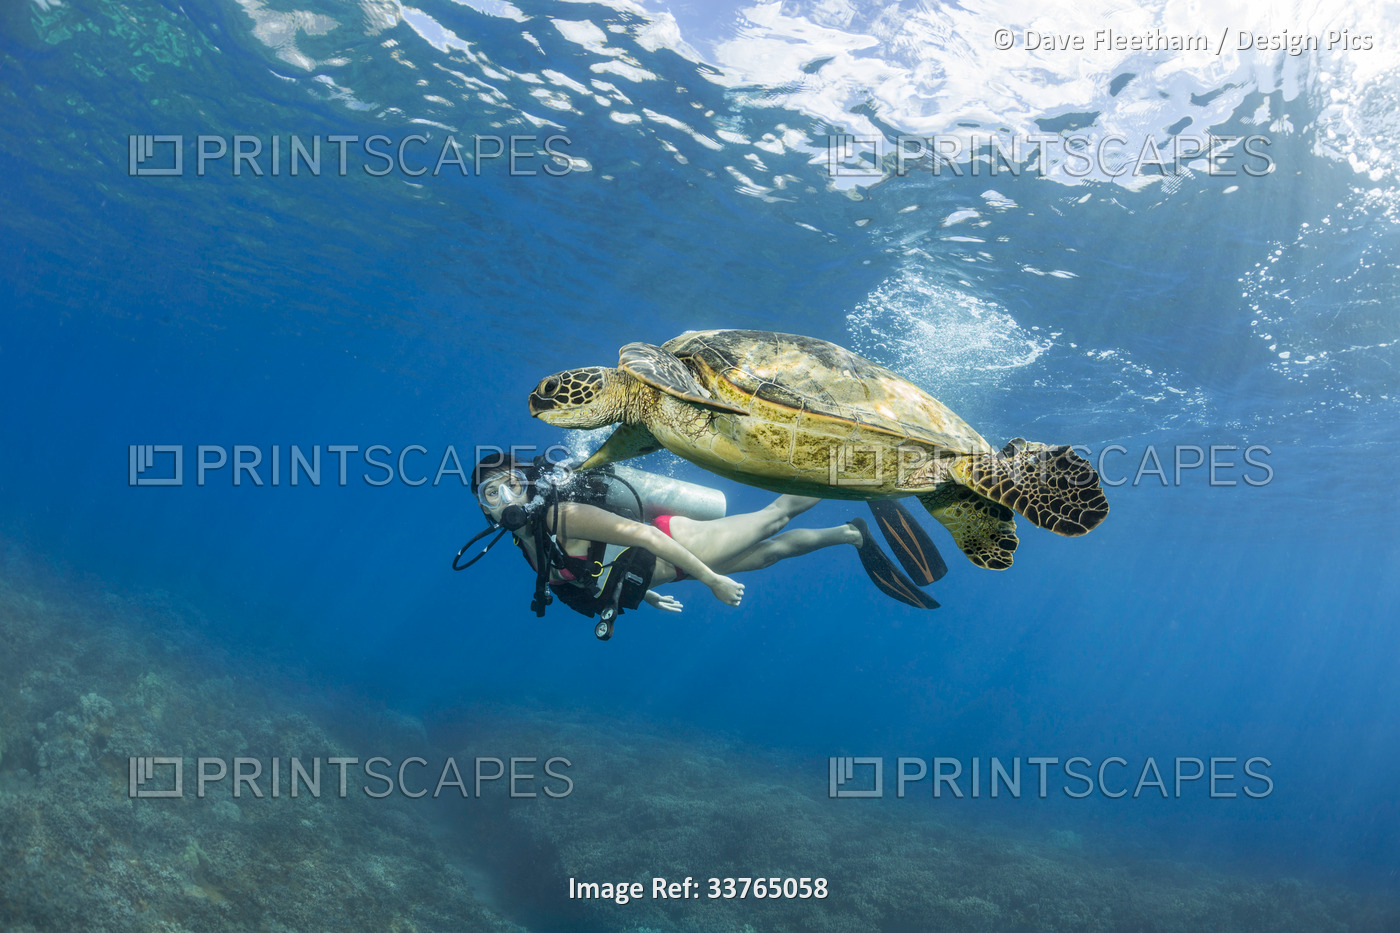 Diver with an endangered species, the Green sea turtle (Chelonia mydas); ...